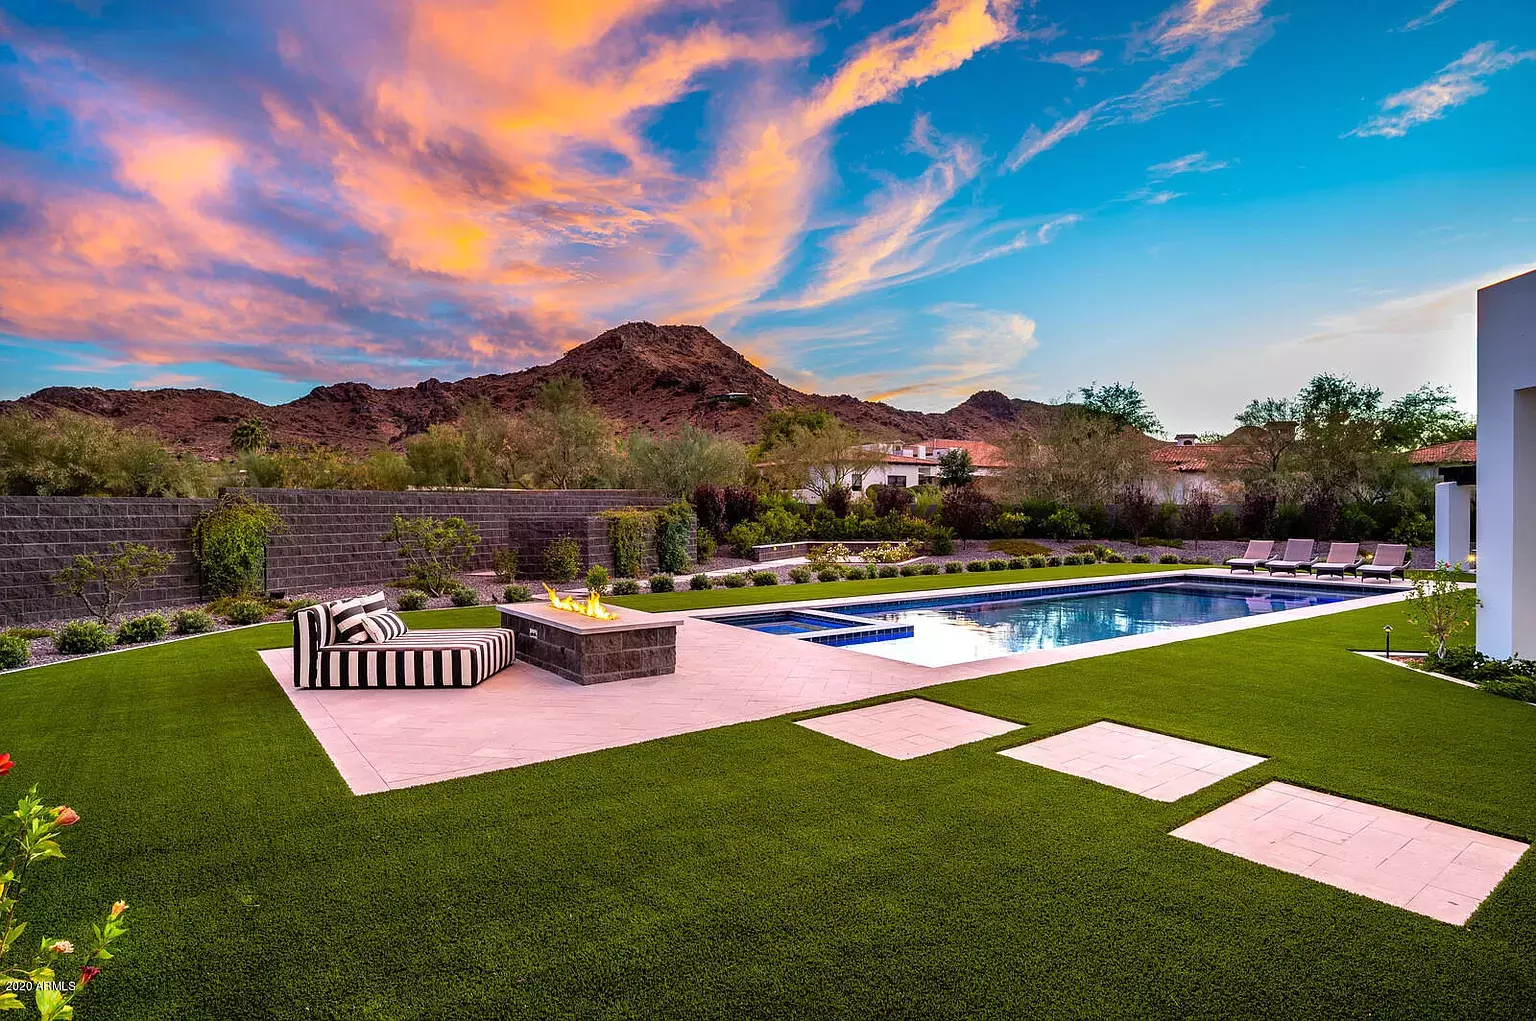 Backyard design featuring swimming pool, pavers, artificial turf, and mountain views under a sunset.